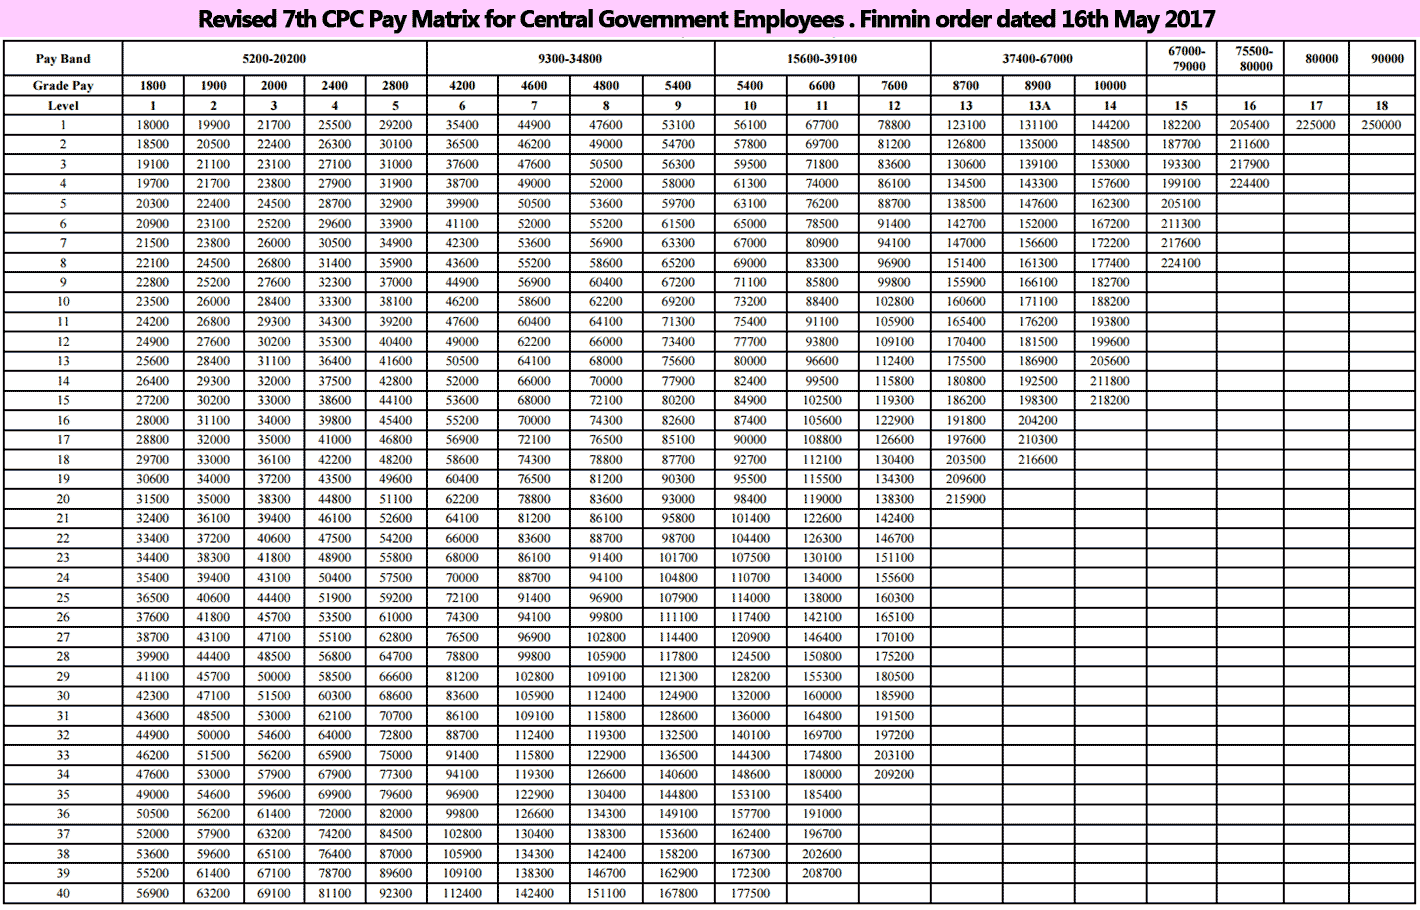 Revised 7th CPC Pay Matrix dated 16th May 2017